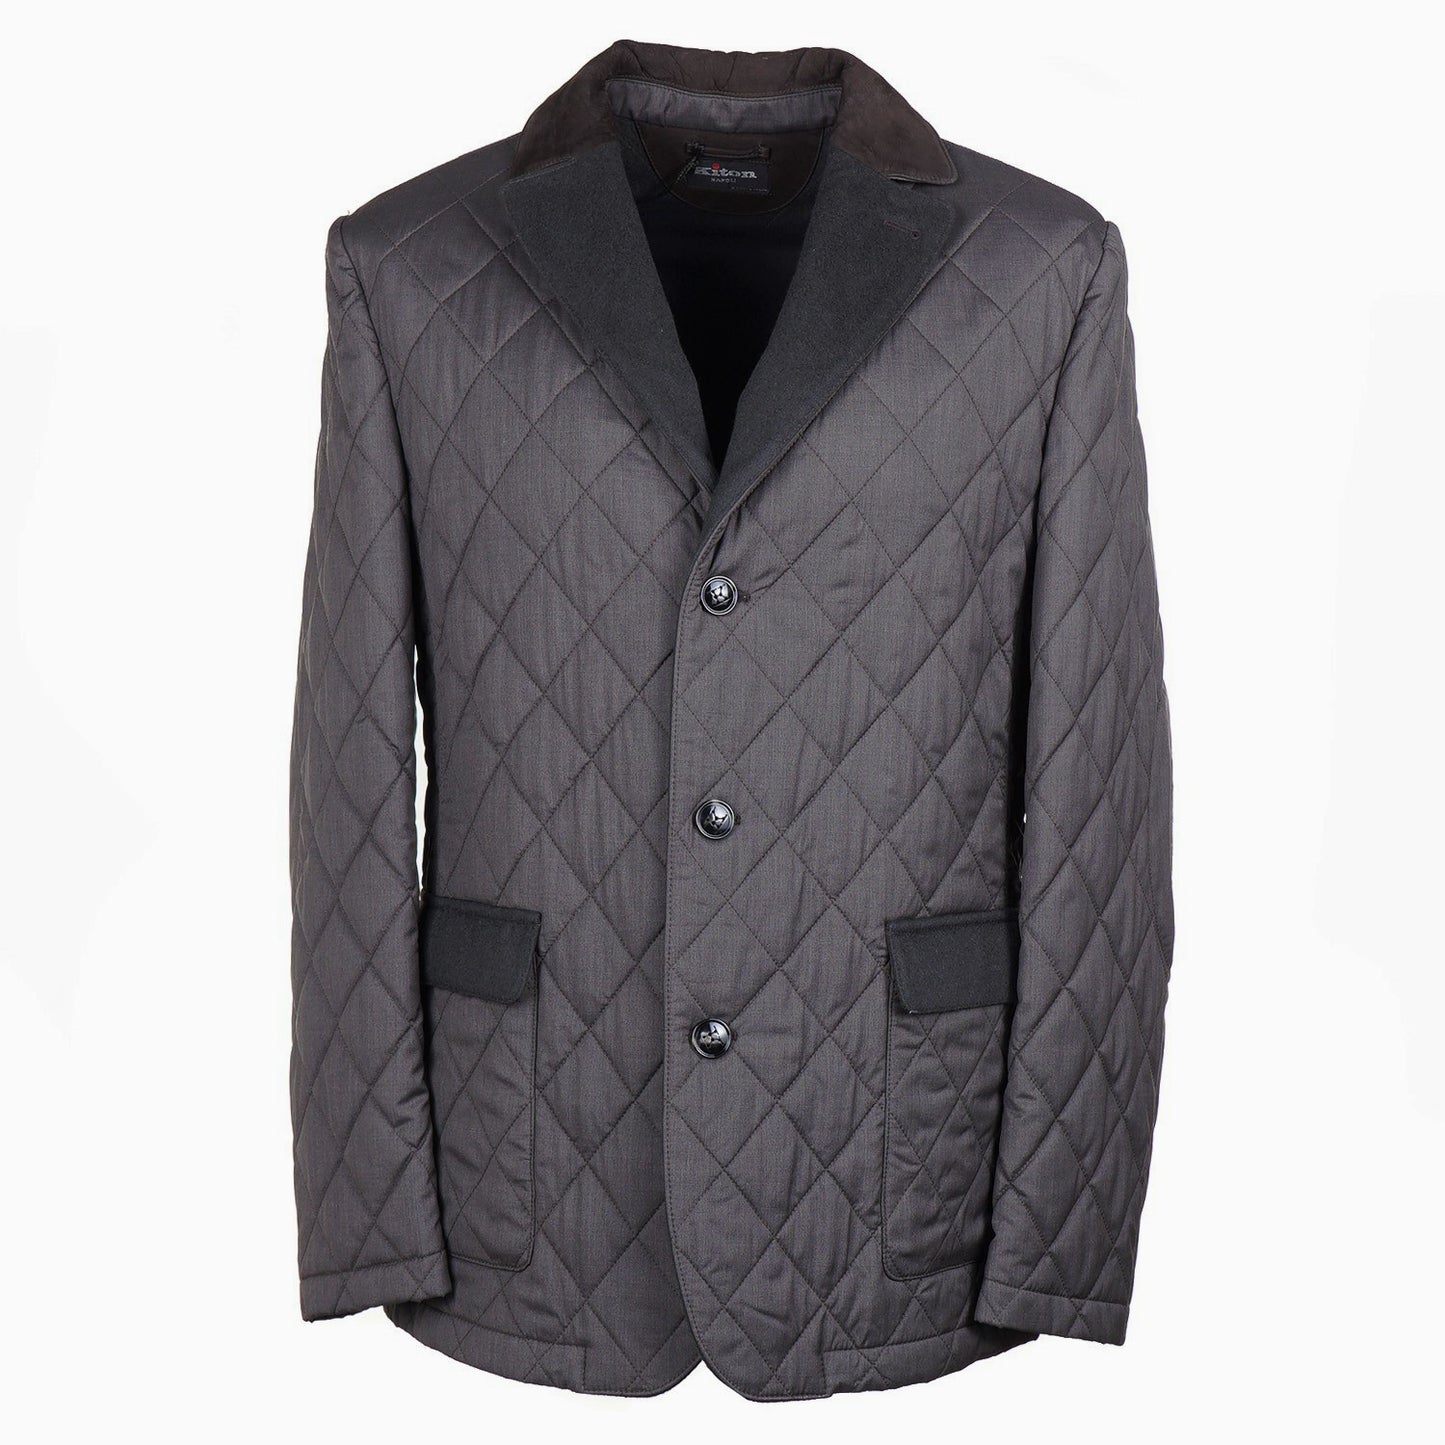 Kiton Quilted Jacket with Cashmere Lining - Top Shelf Apparel